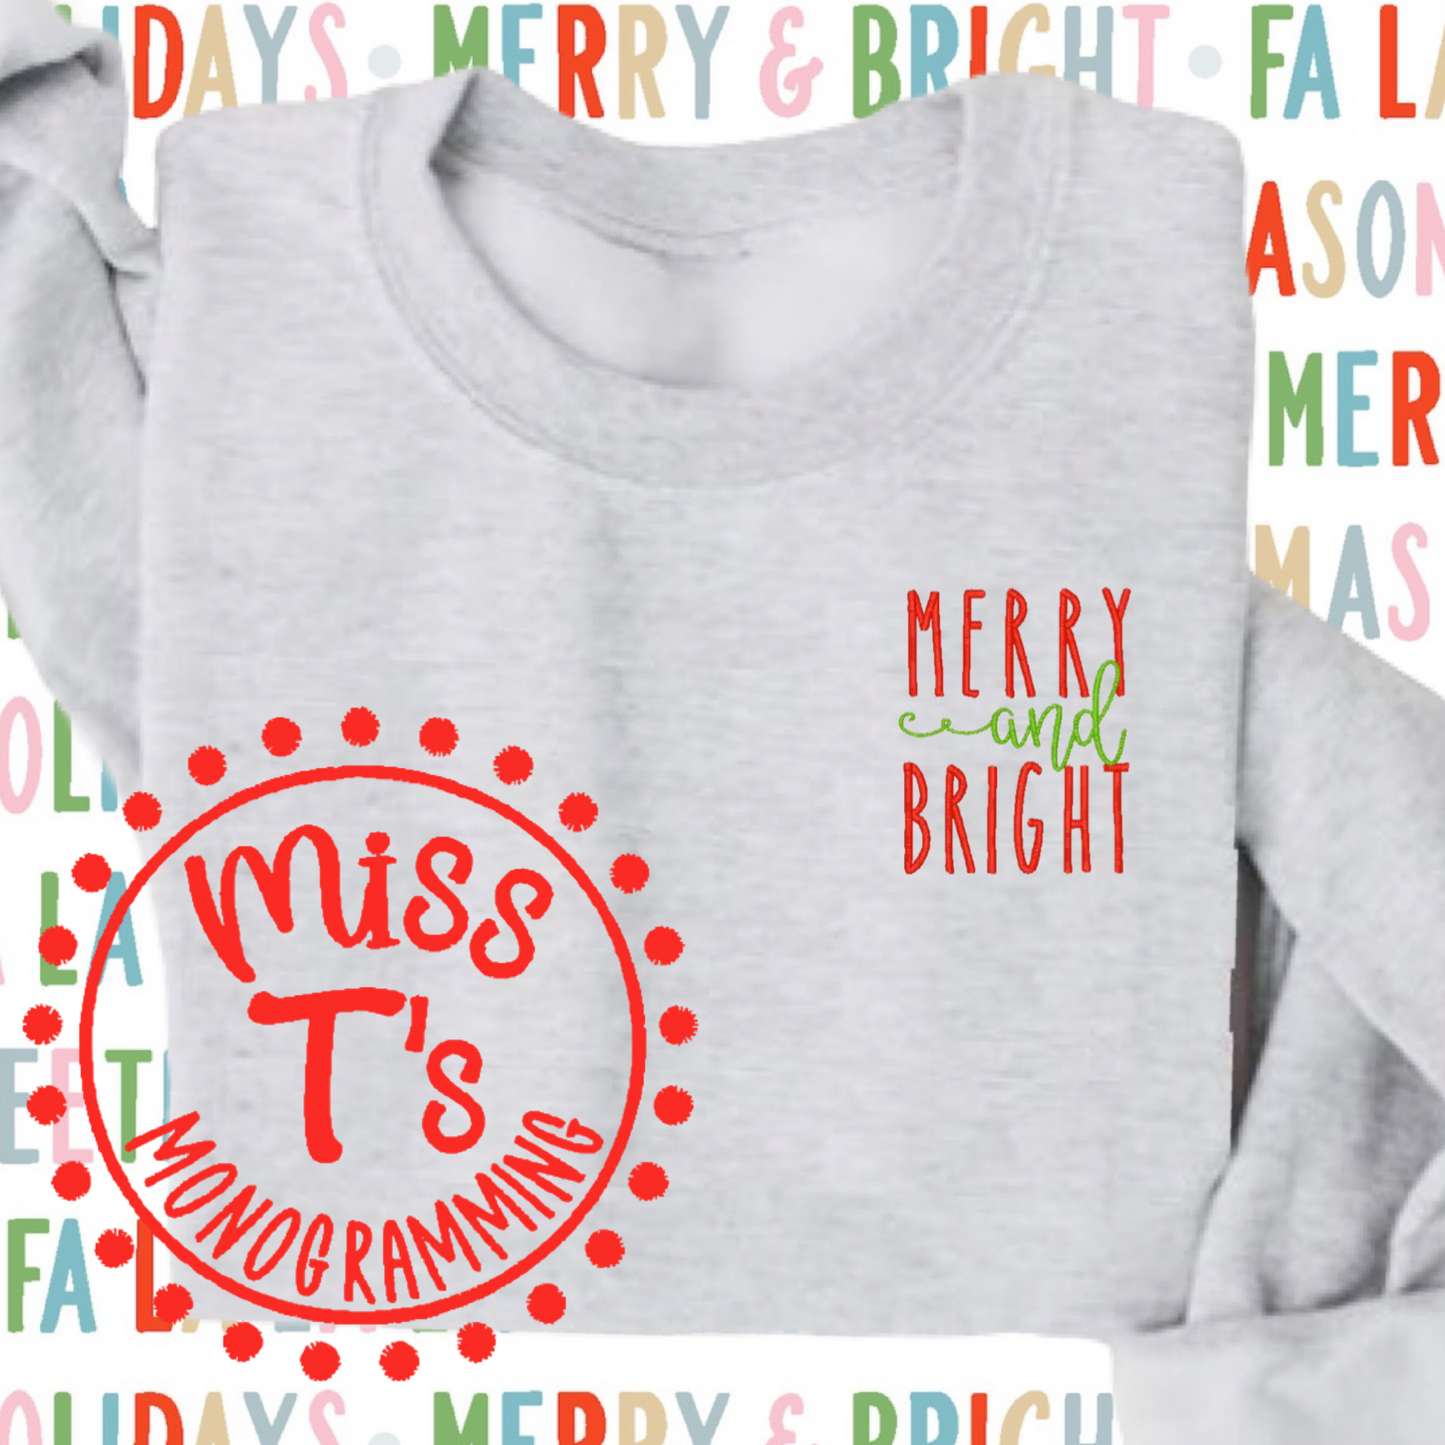 MERRY AND BRIGHT SIMPLE AND SWEET EMBROIDERED HOLIDAY SWEATSHIRT